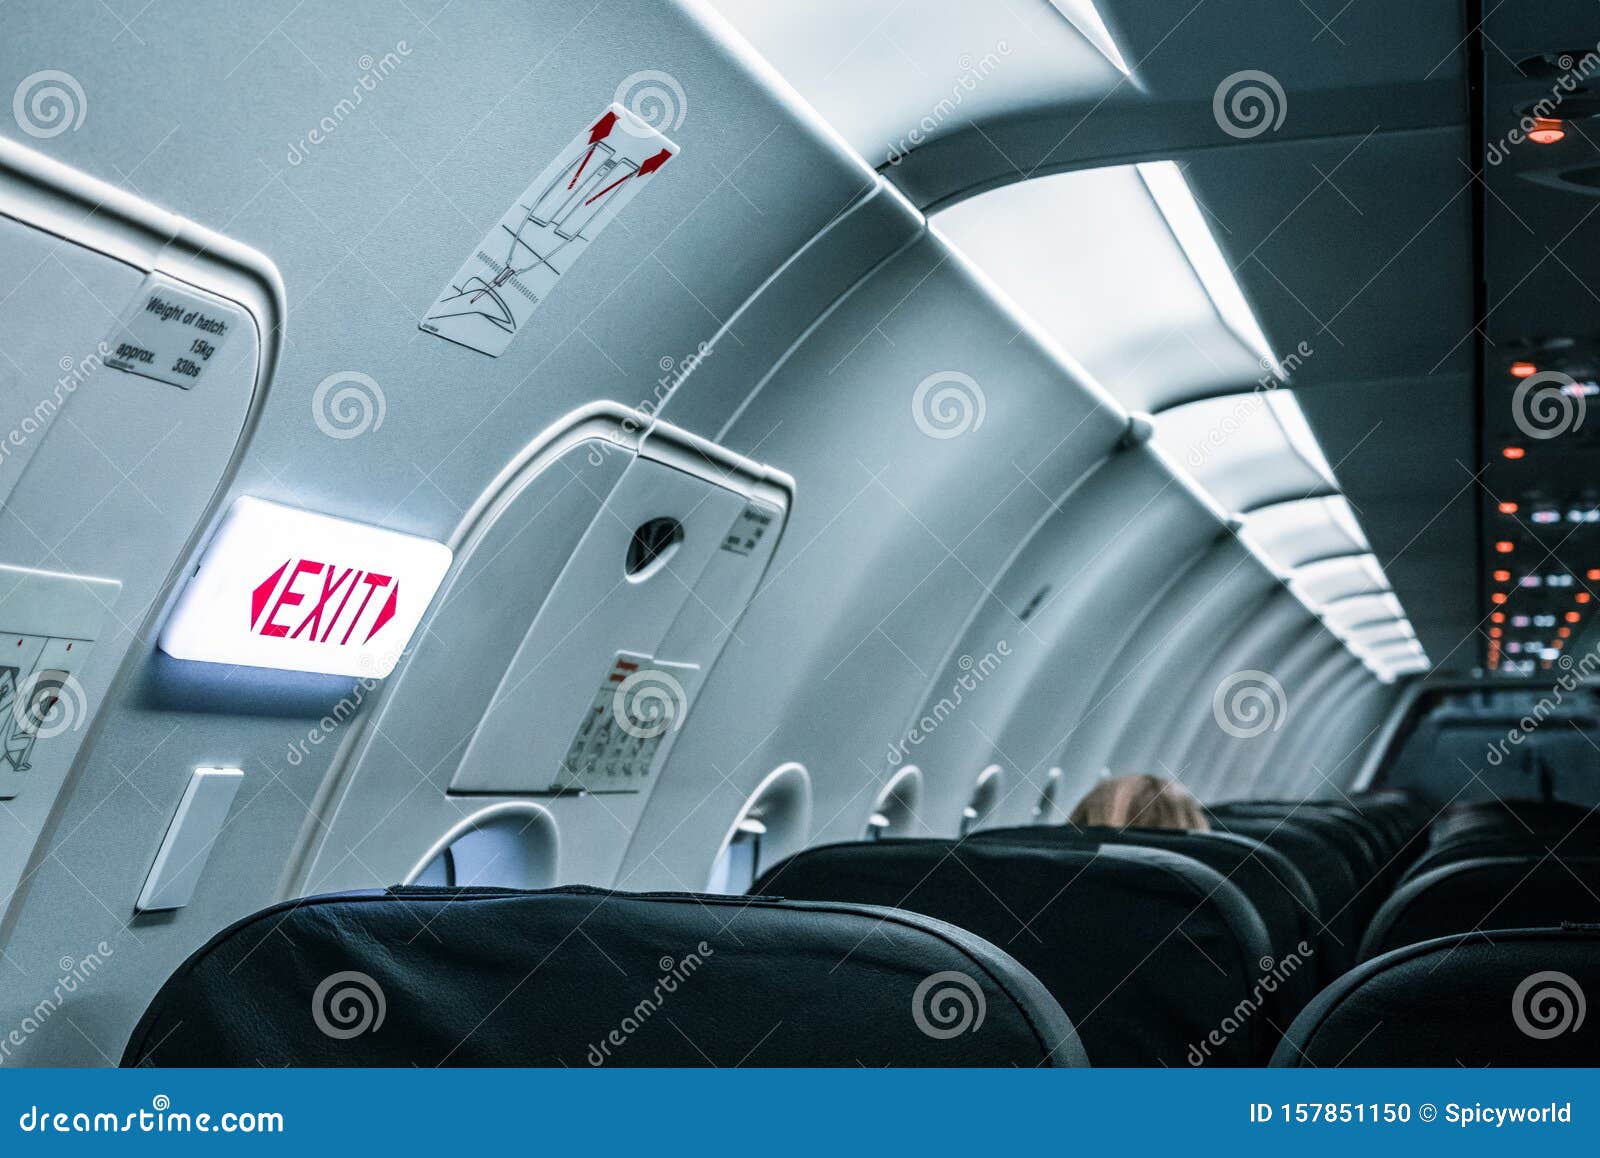 The Exit Sign Inside The Aircraft And Cabin Lights Stock Photo Image of salon, airline 157851150